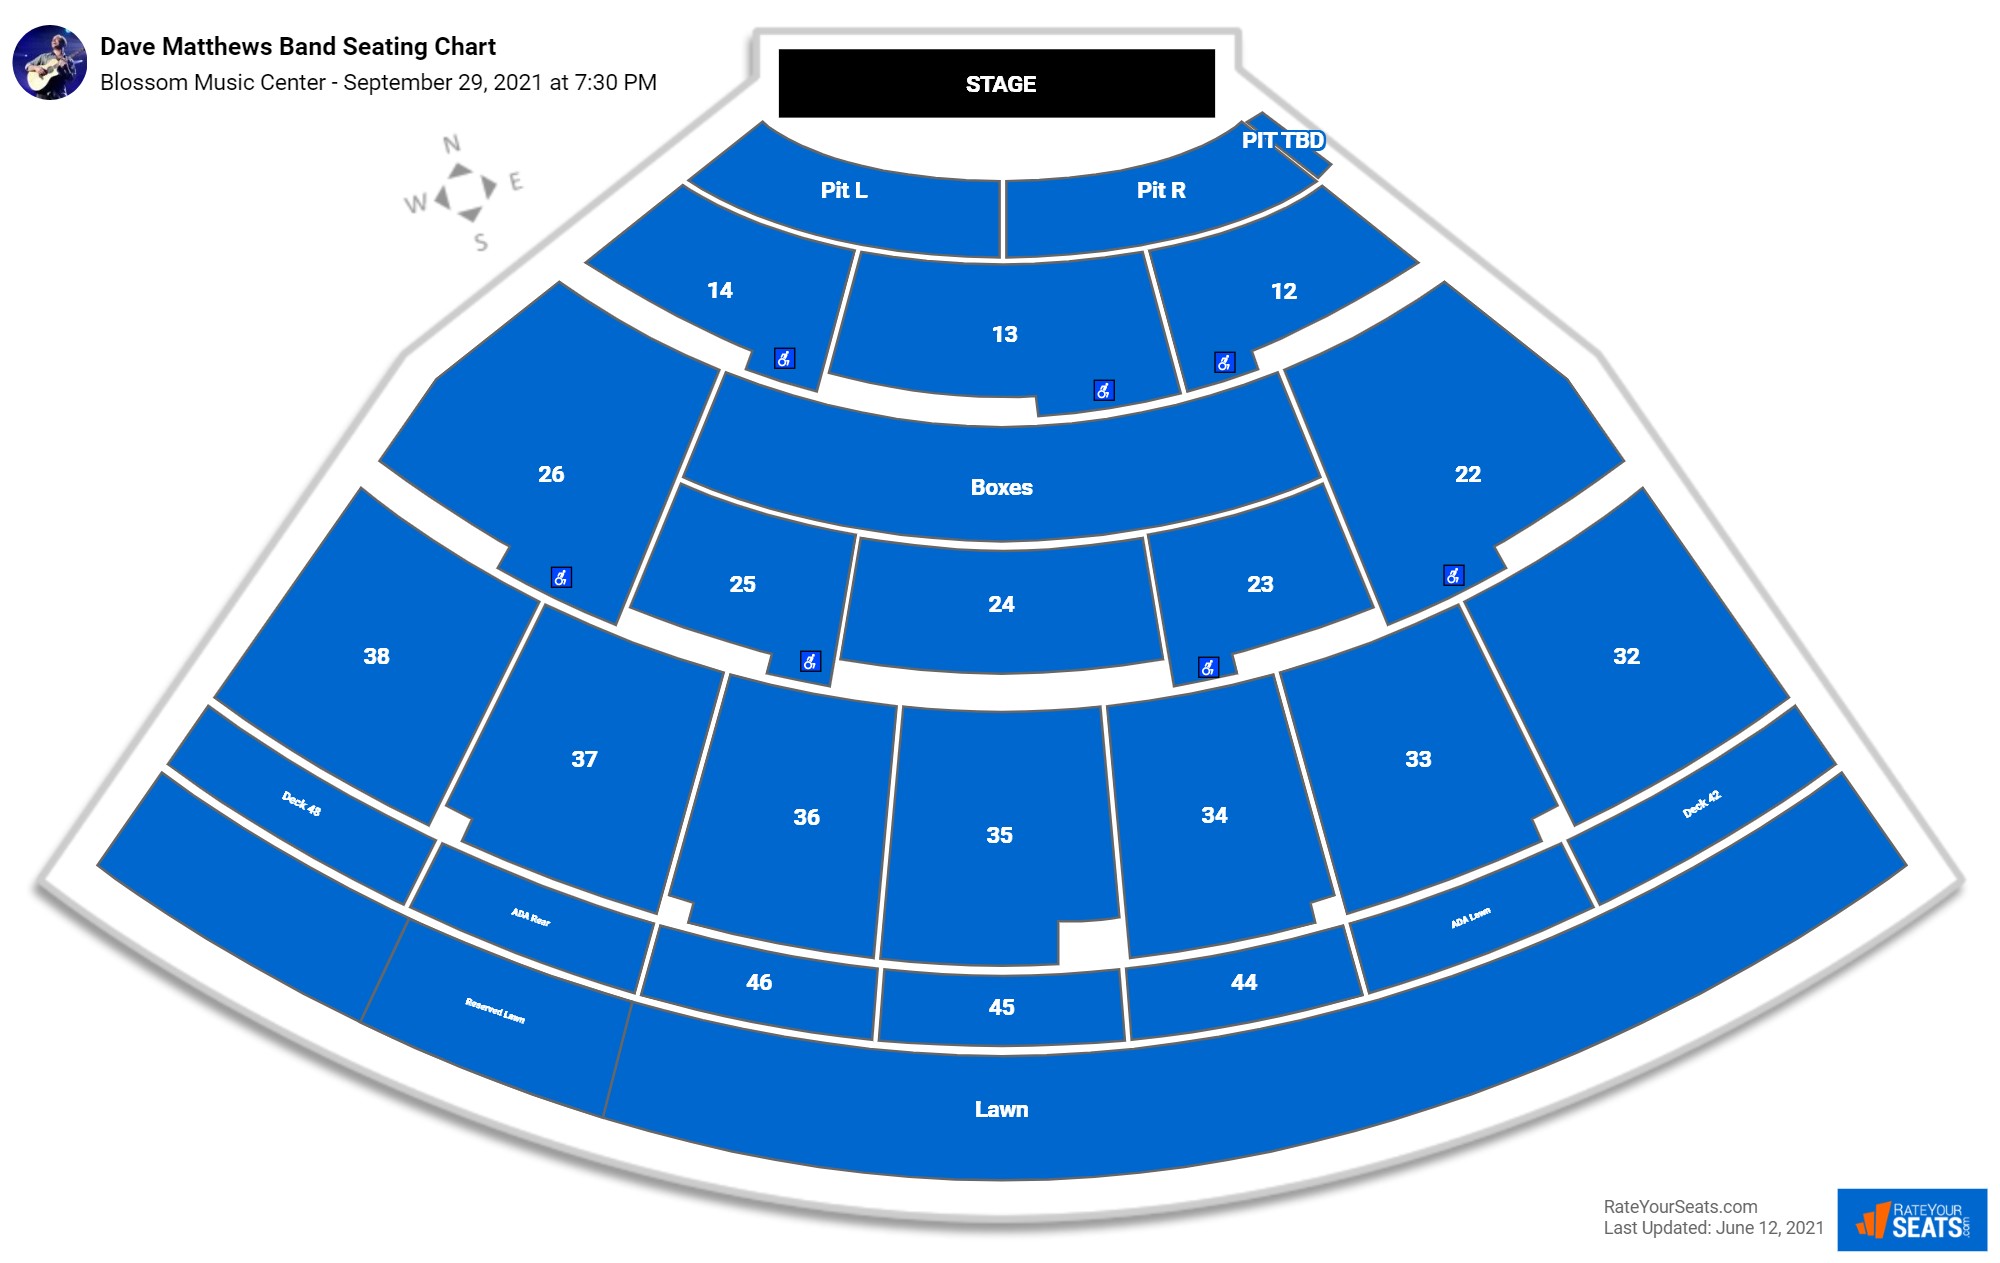 Blossom Music Center Seating Chart - RateYourSeats.com